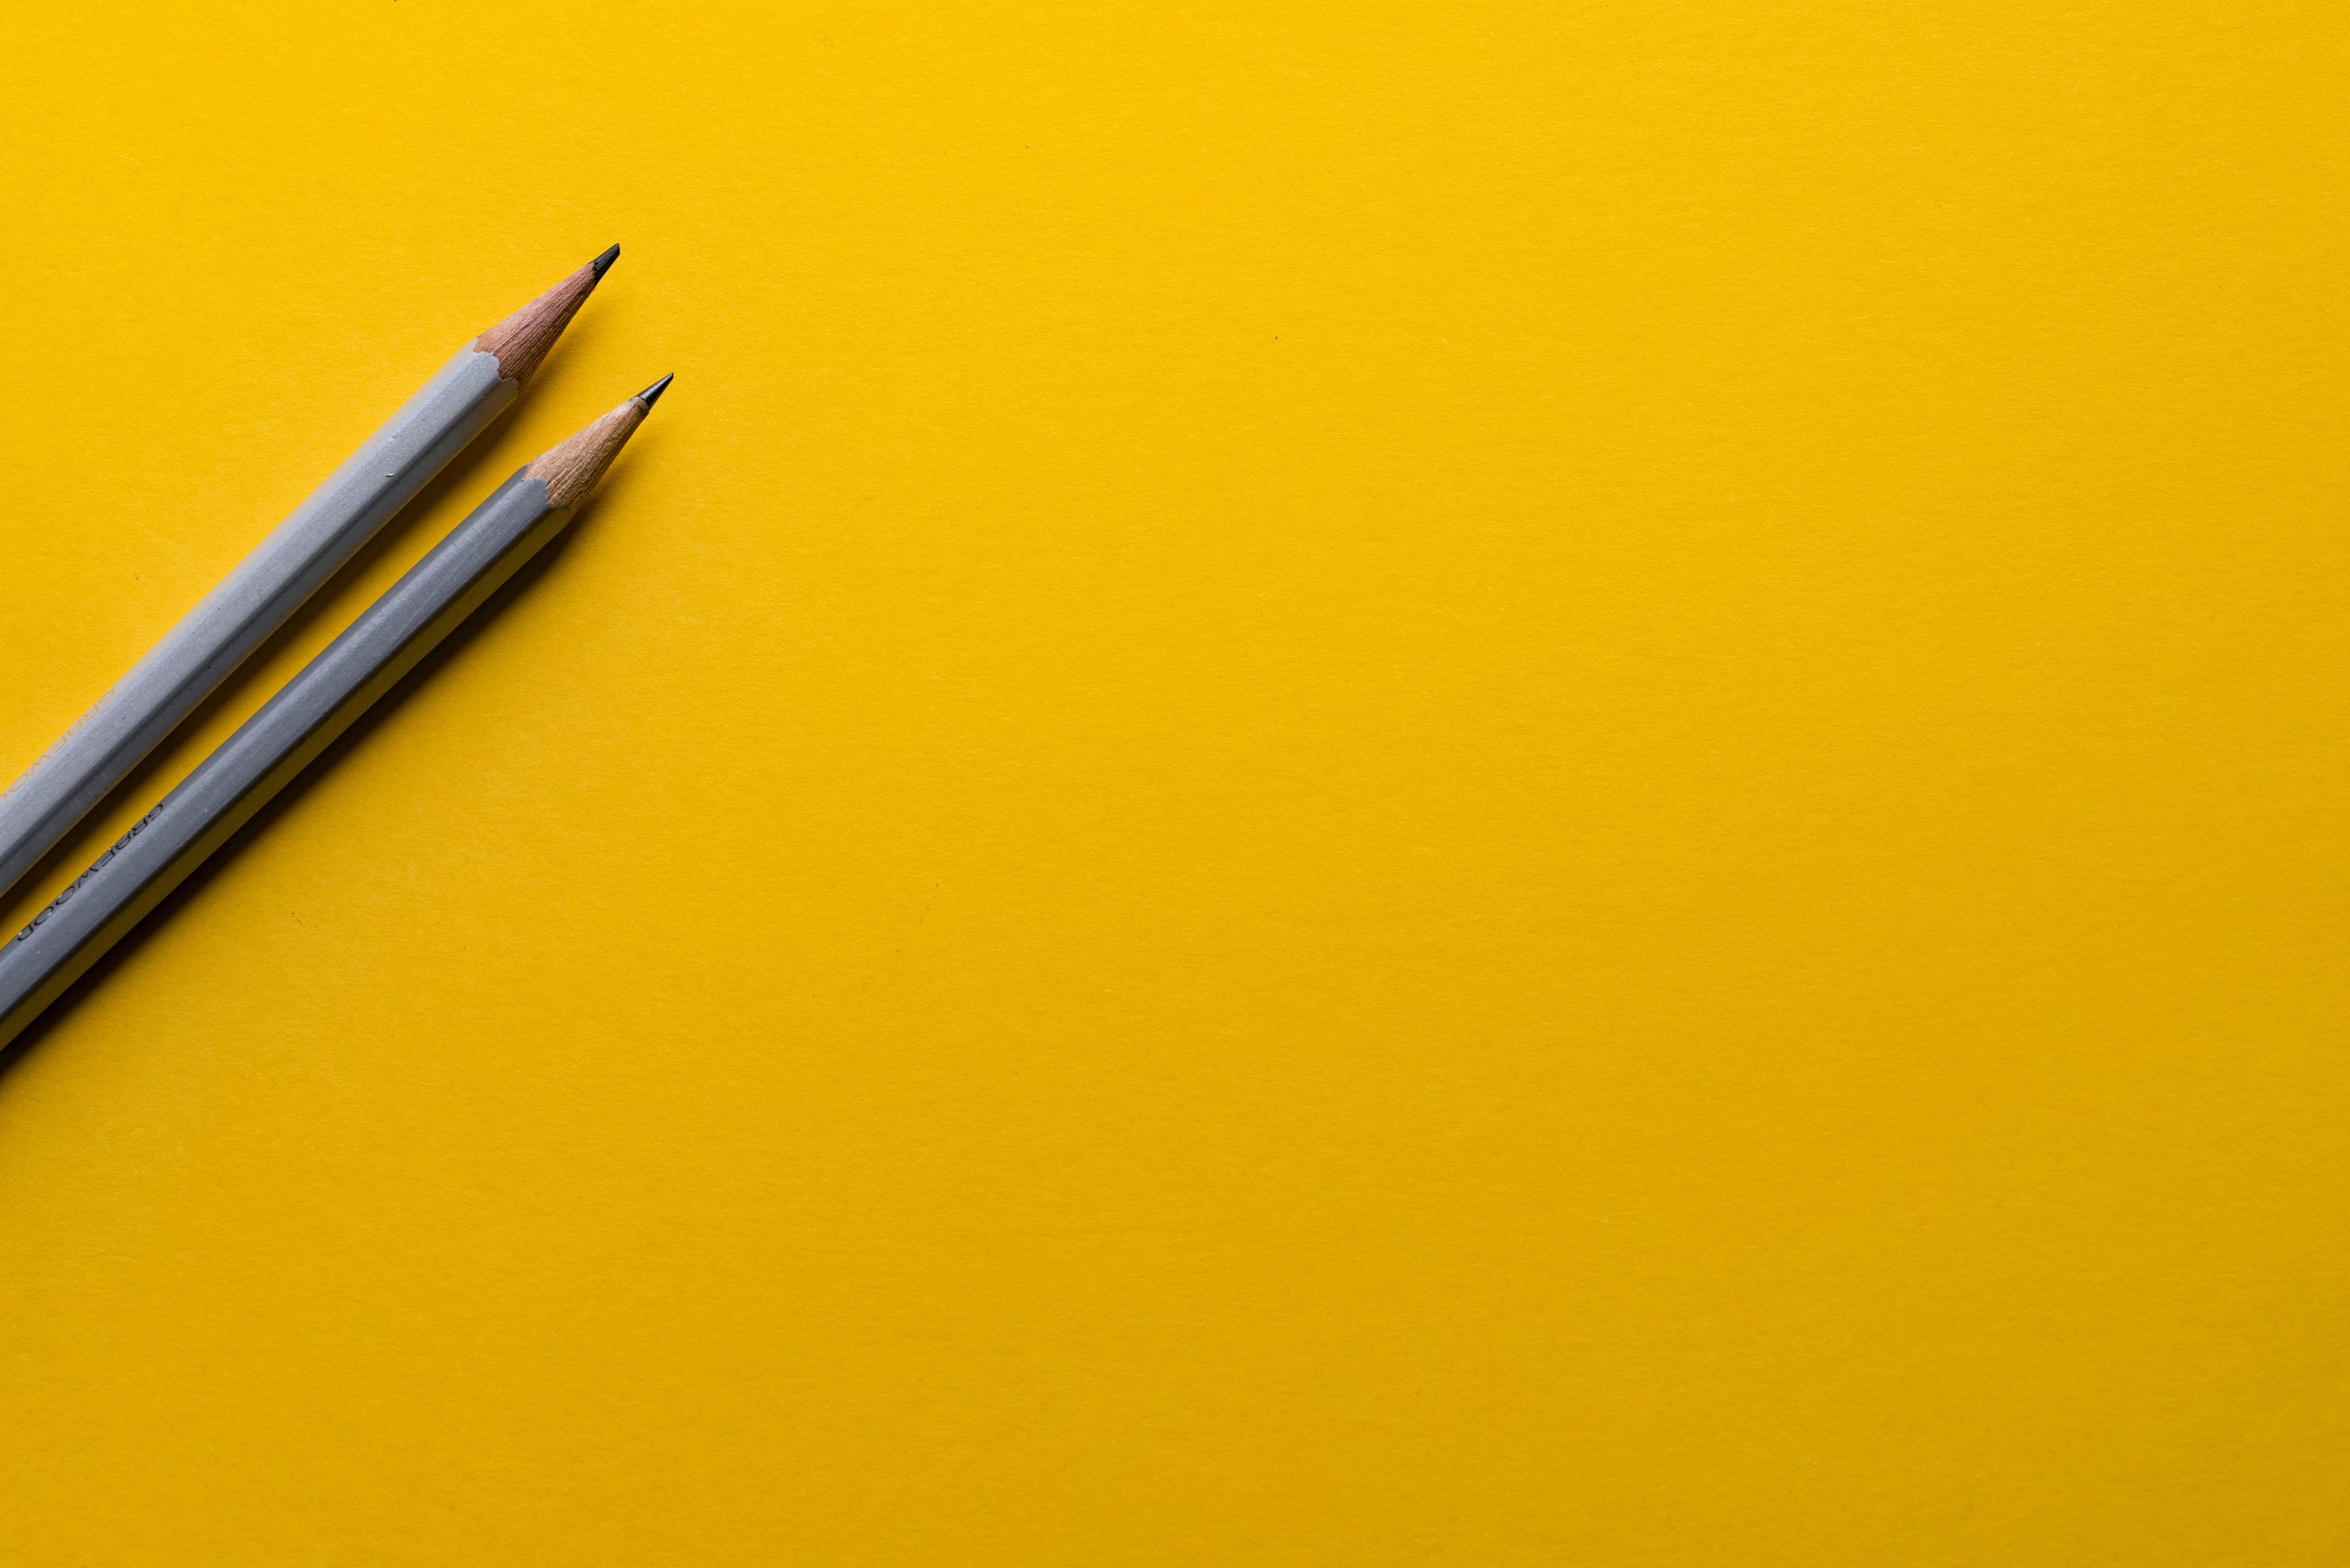 Two sharpened pencils on a bright yellow background